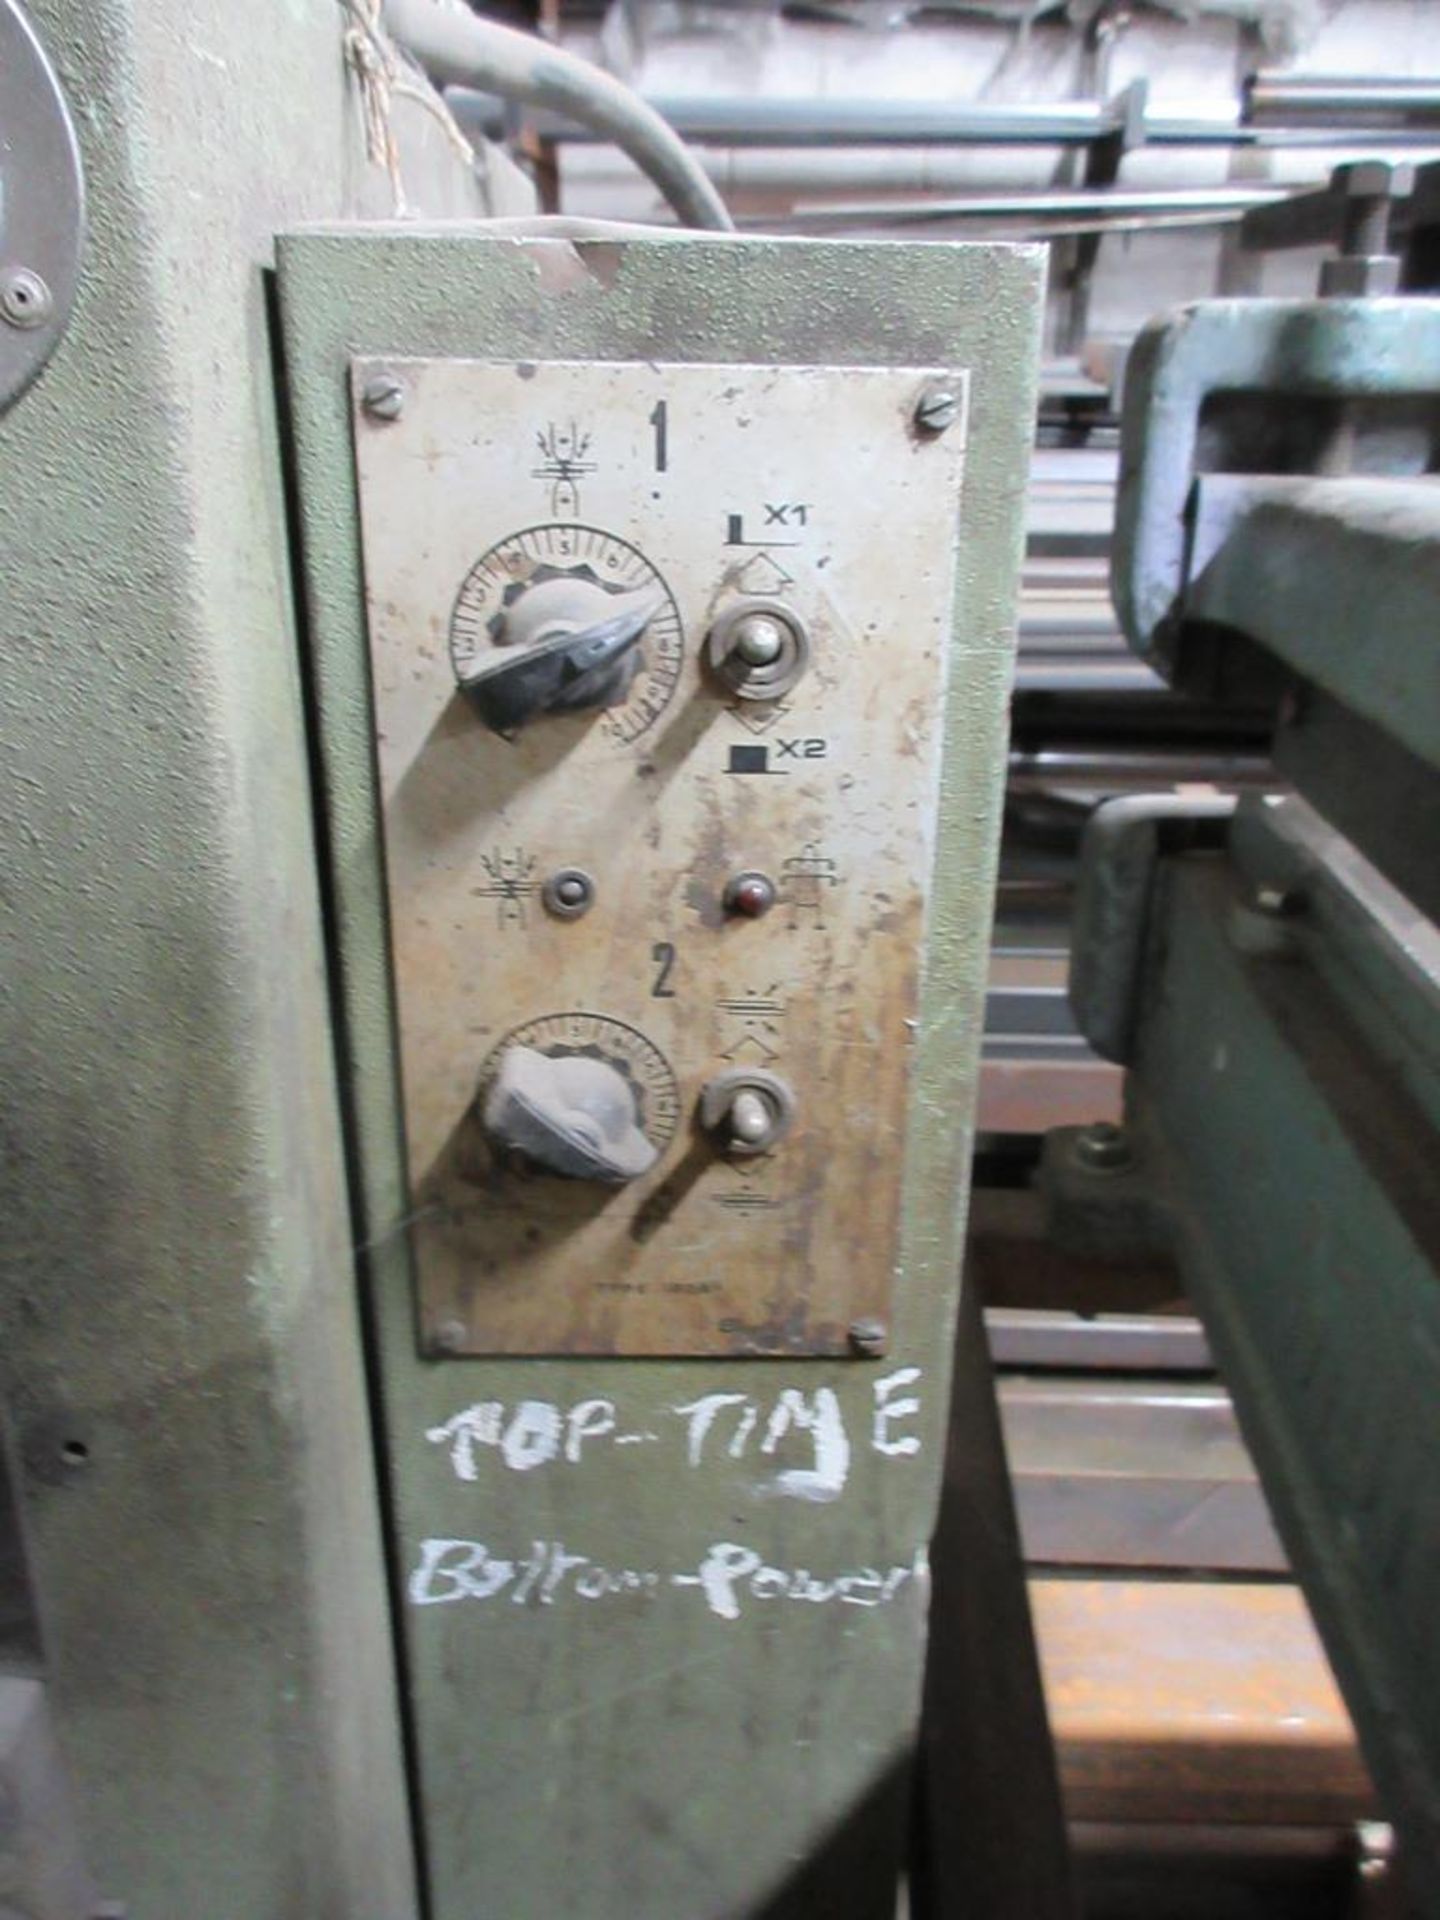 Spot welder - unsure of working condition - Image 2 of 7